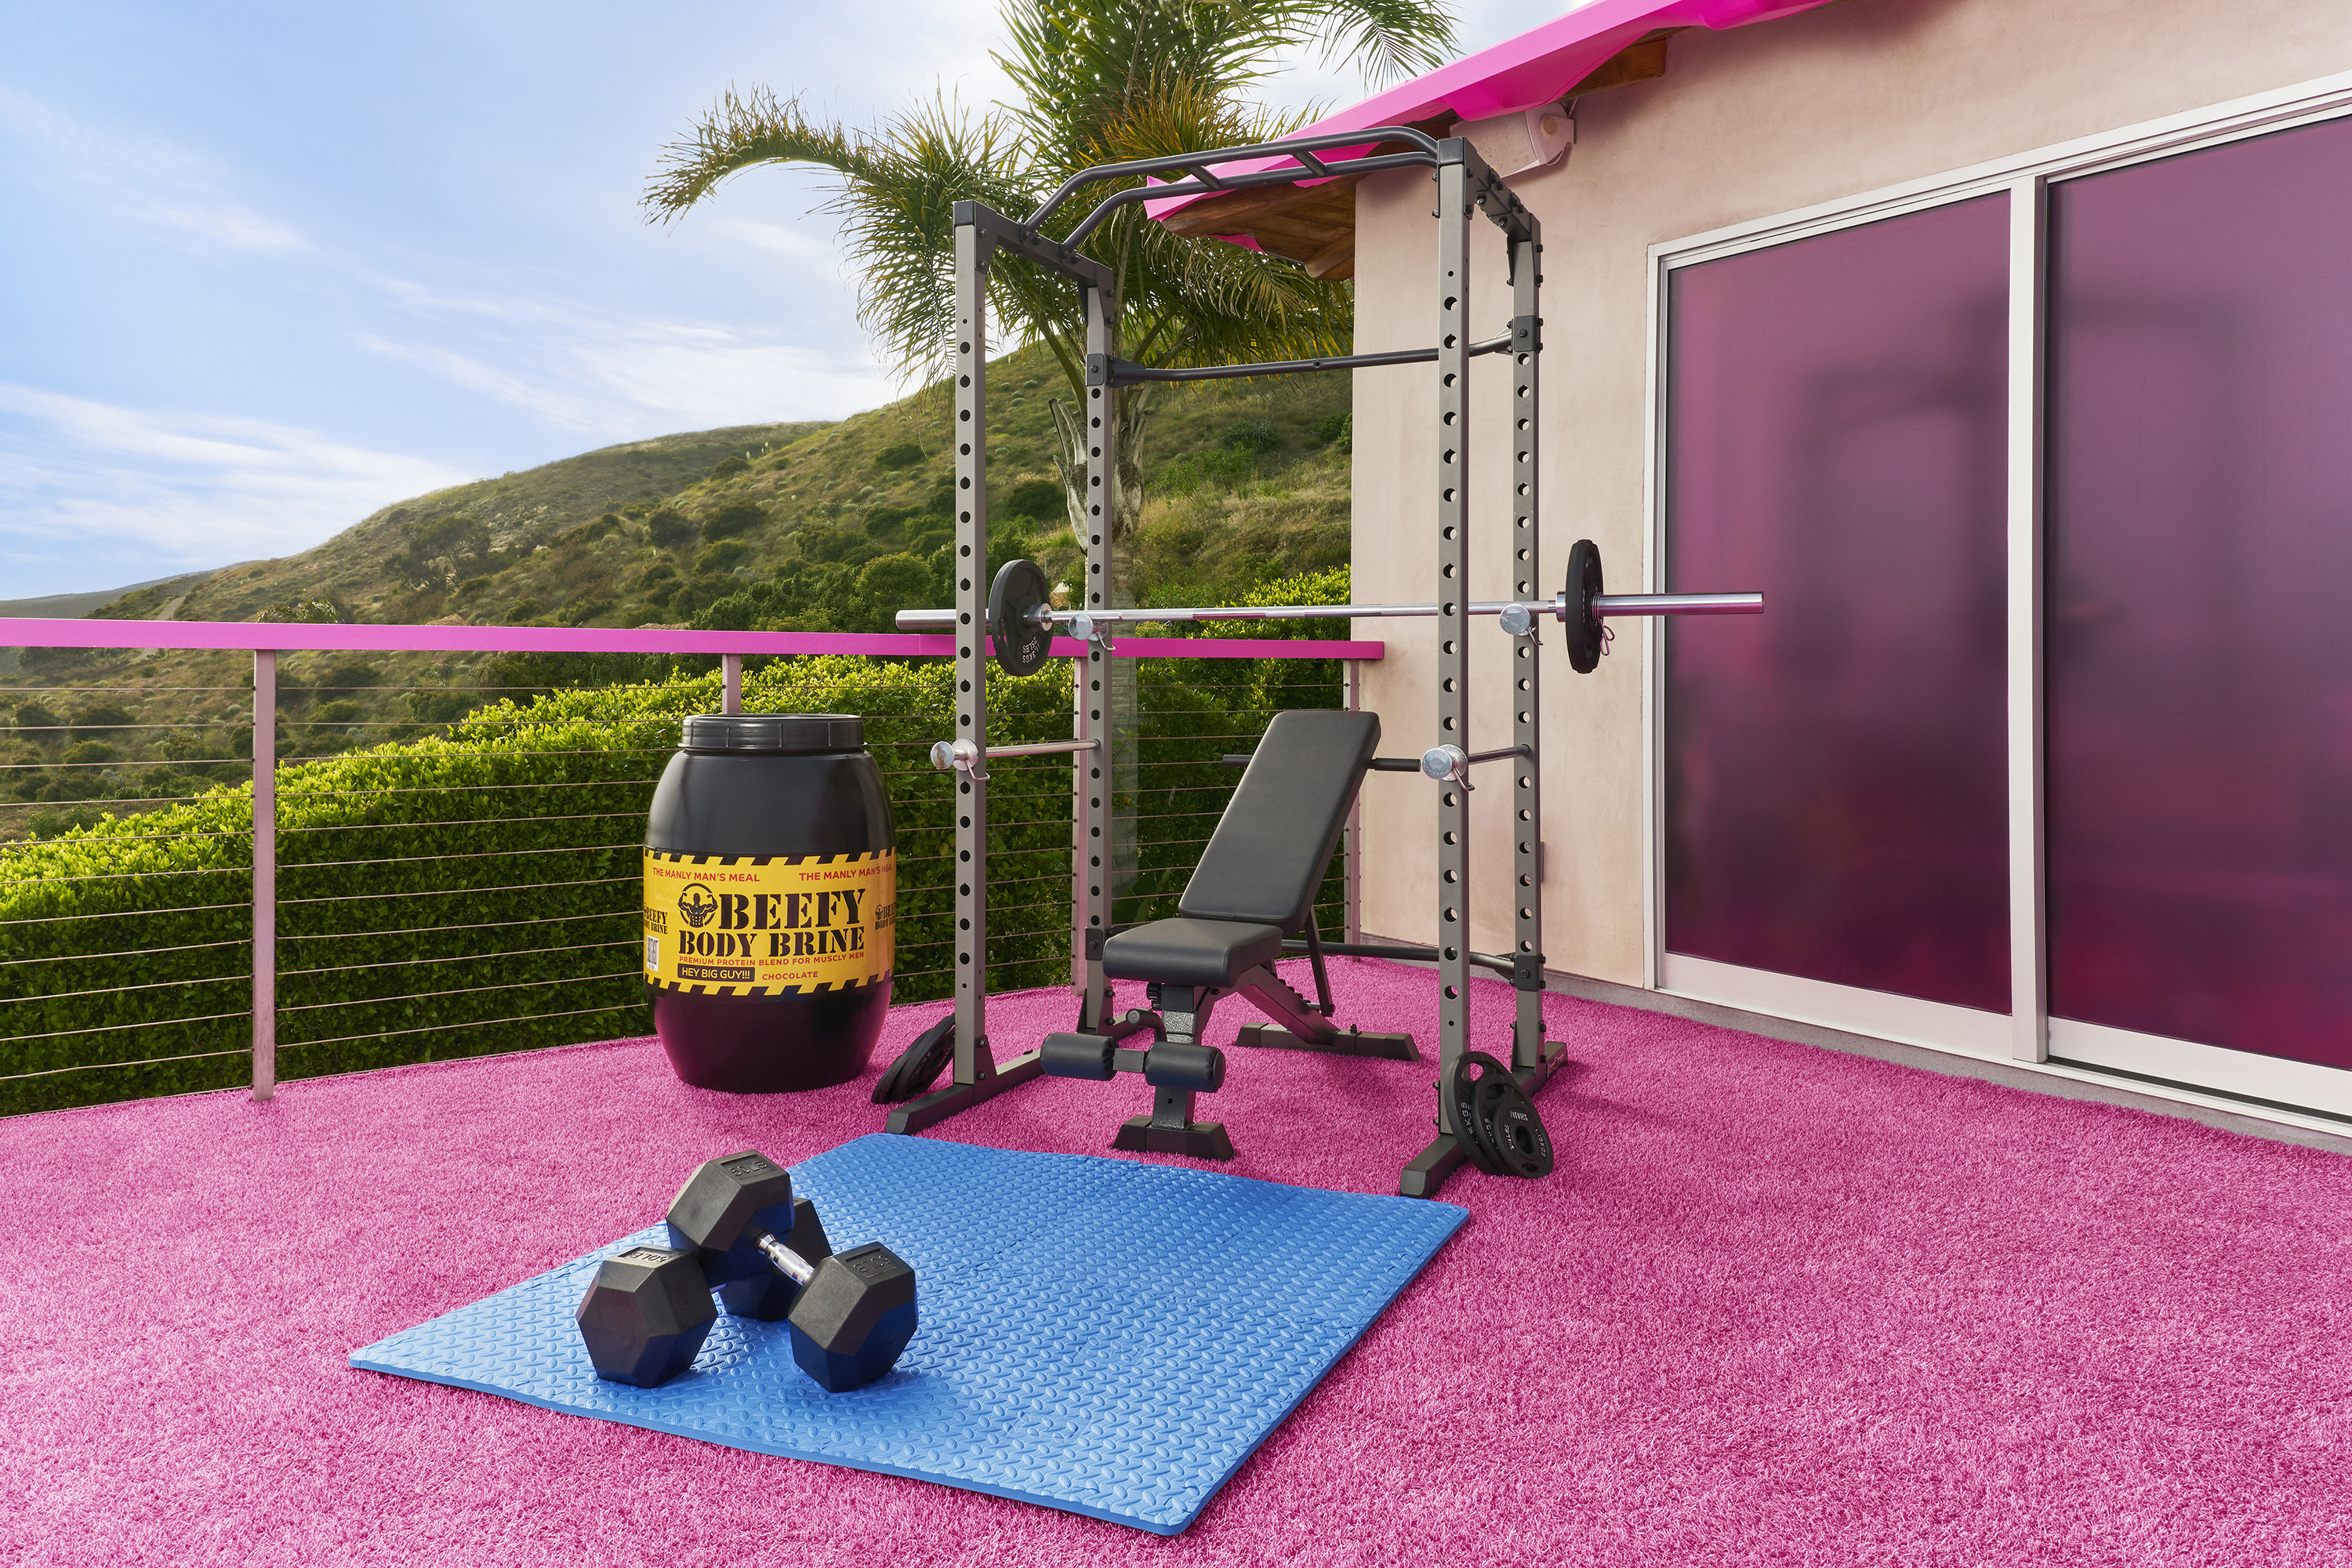 Outdoor gym area on a balcony, pink fluffy rug underneath the equipment and sliding glass doors behind it.